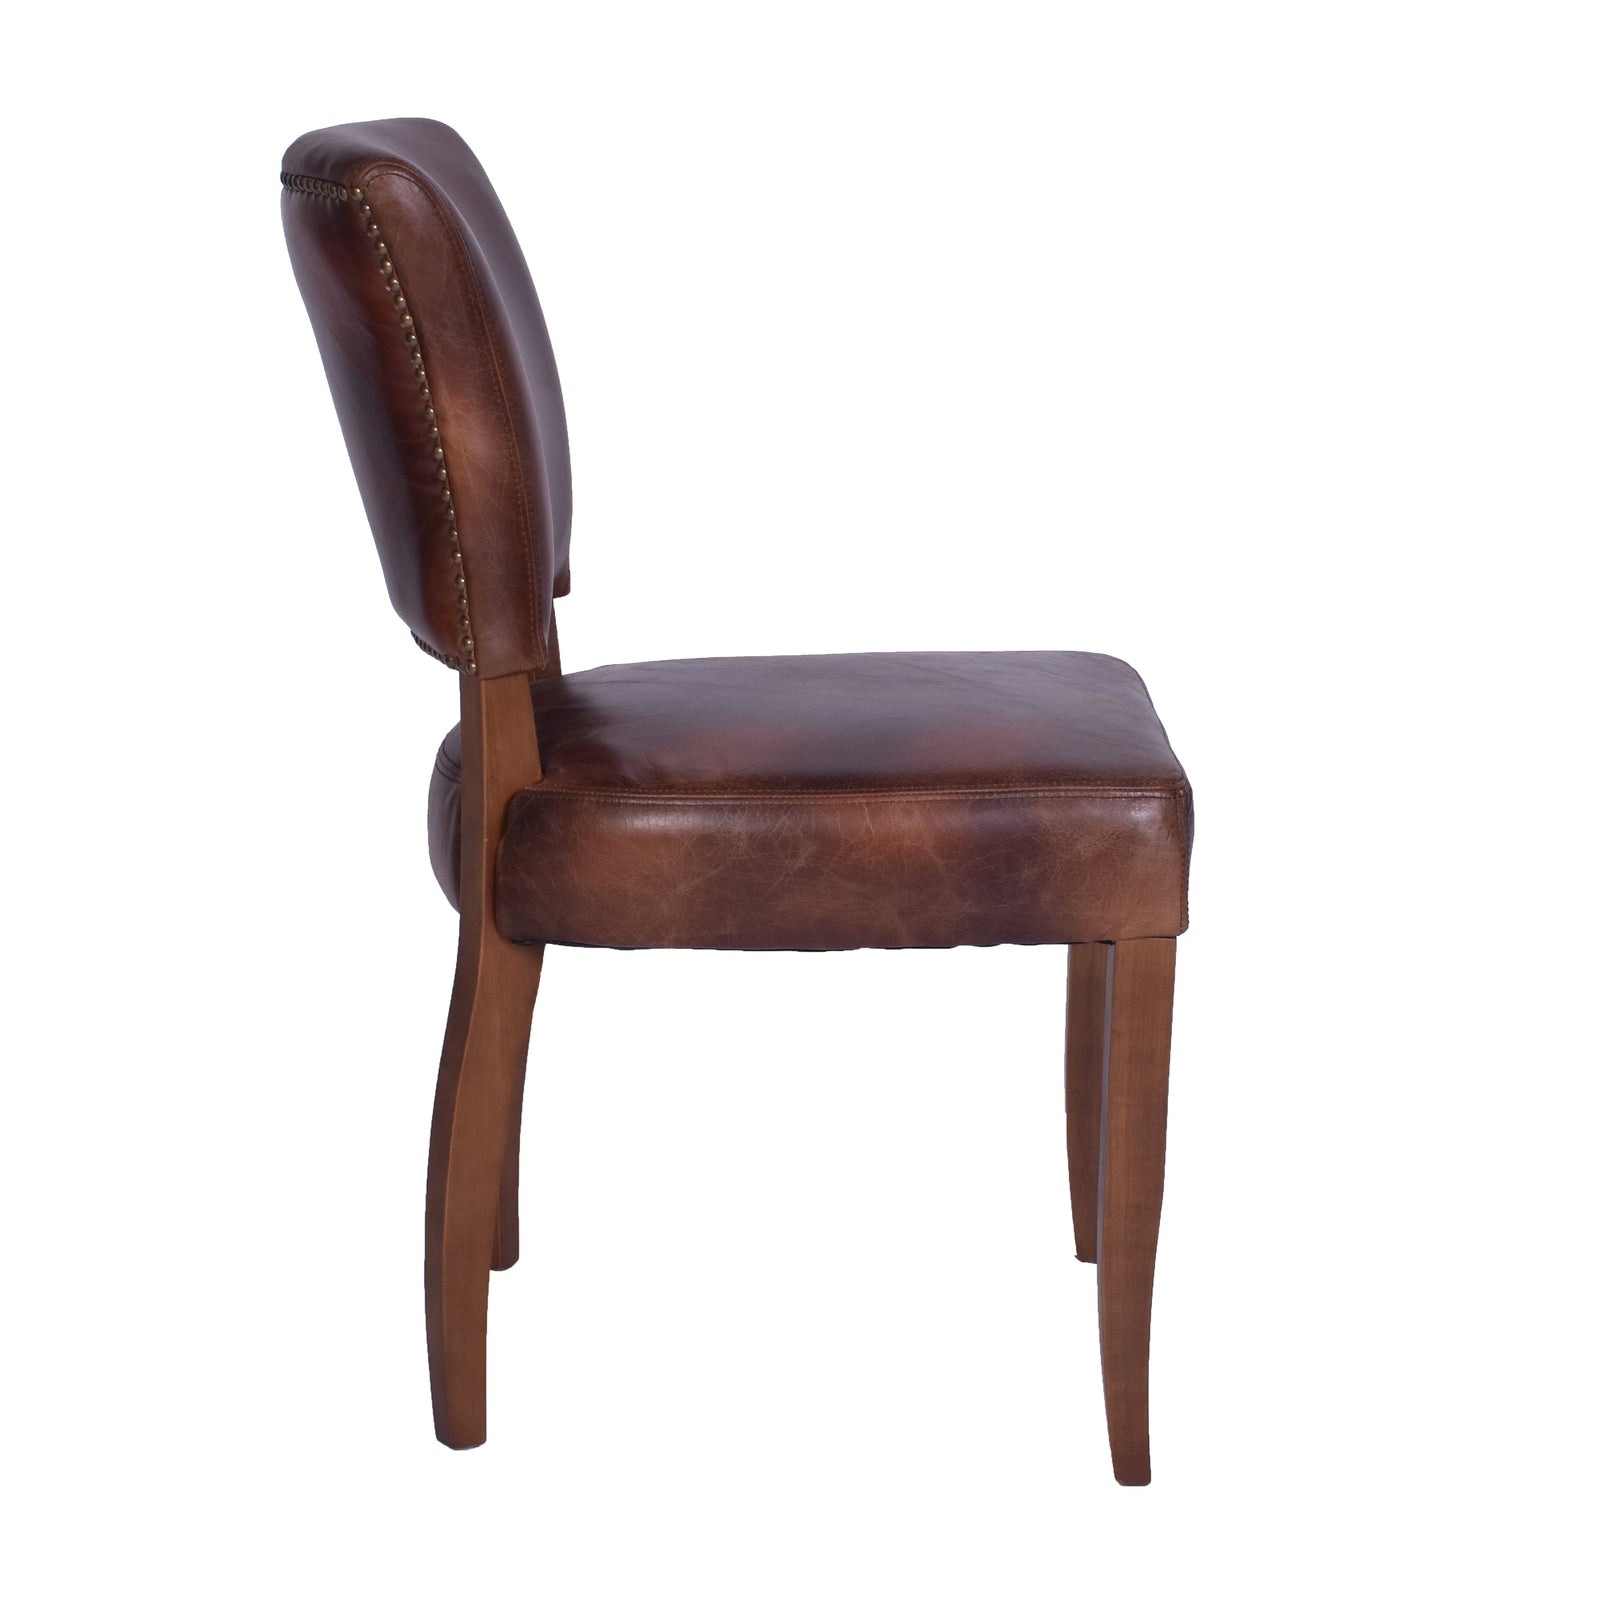 Cartier Wax Leather Dining Chair Maron - Dovetailed & Doublestitched